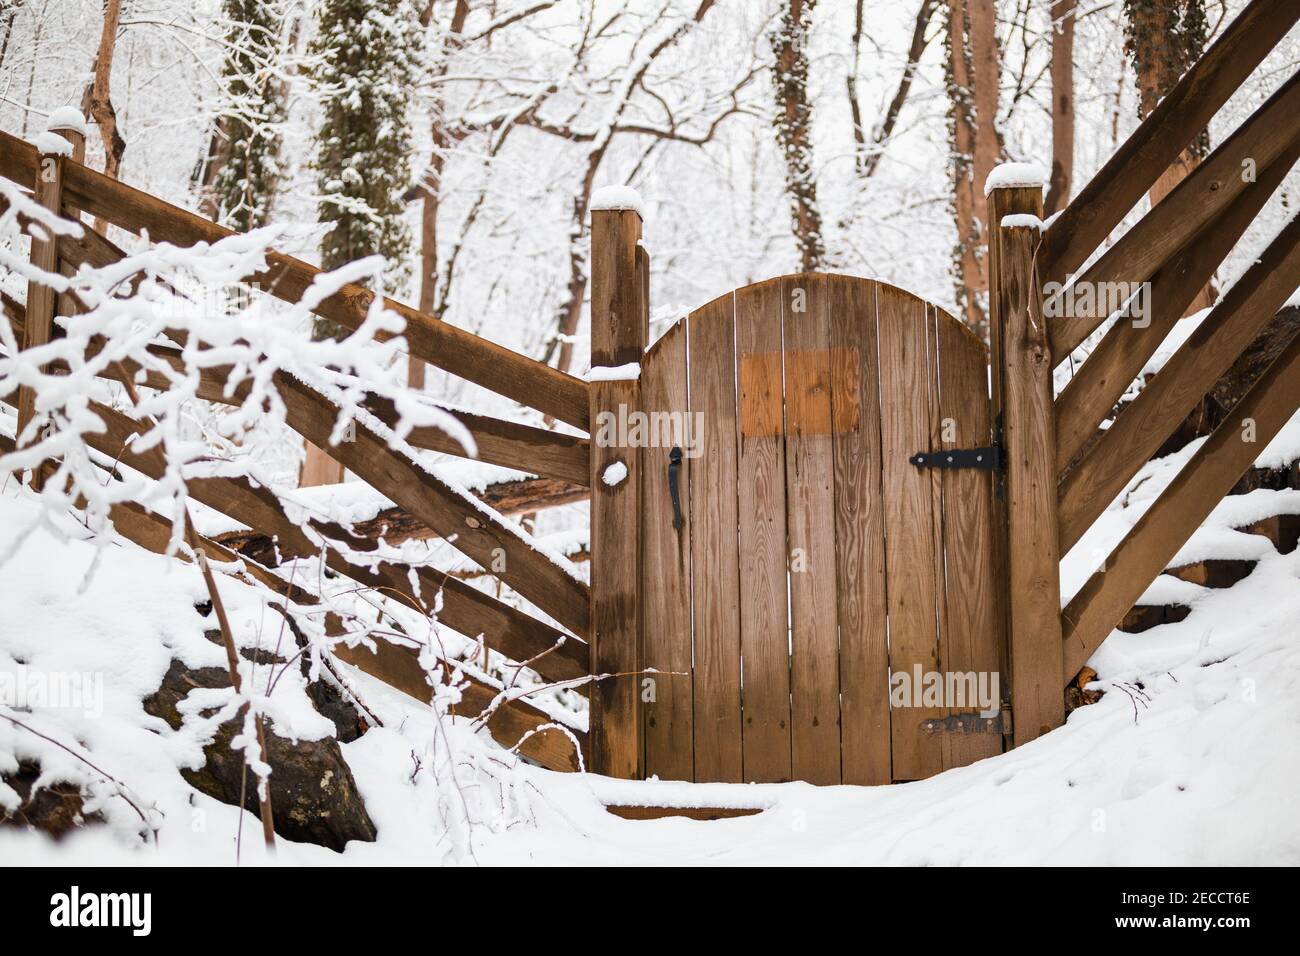 Gate in a snow-covered forest Stock Photo